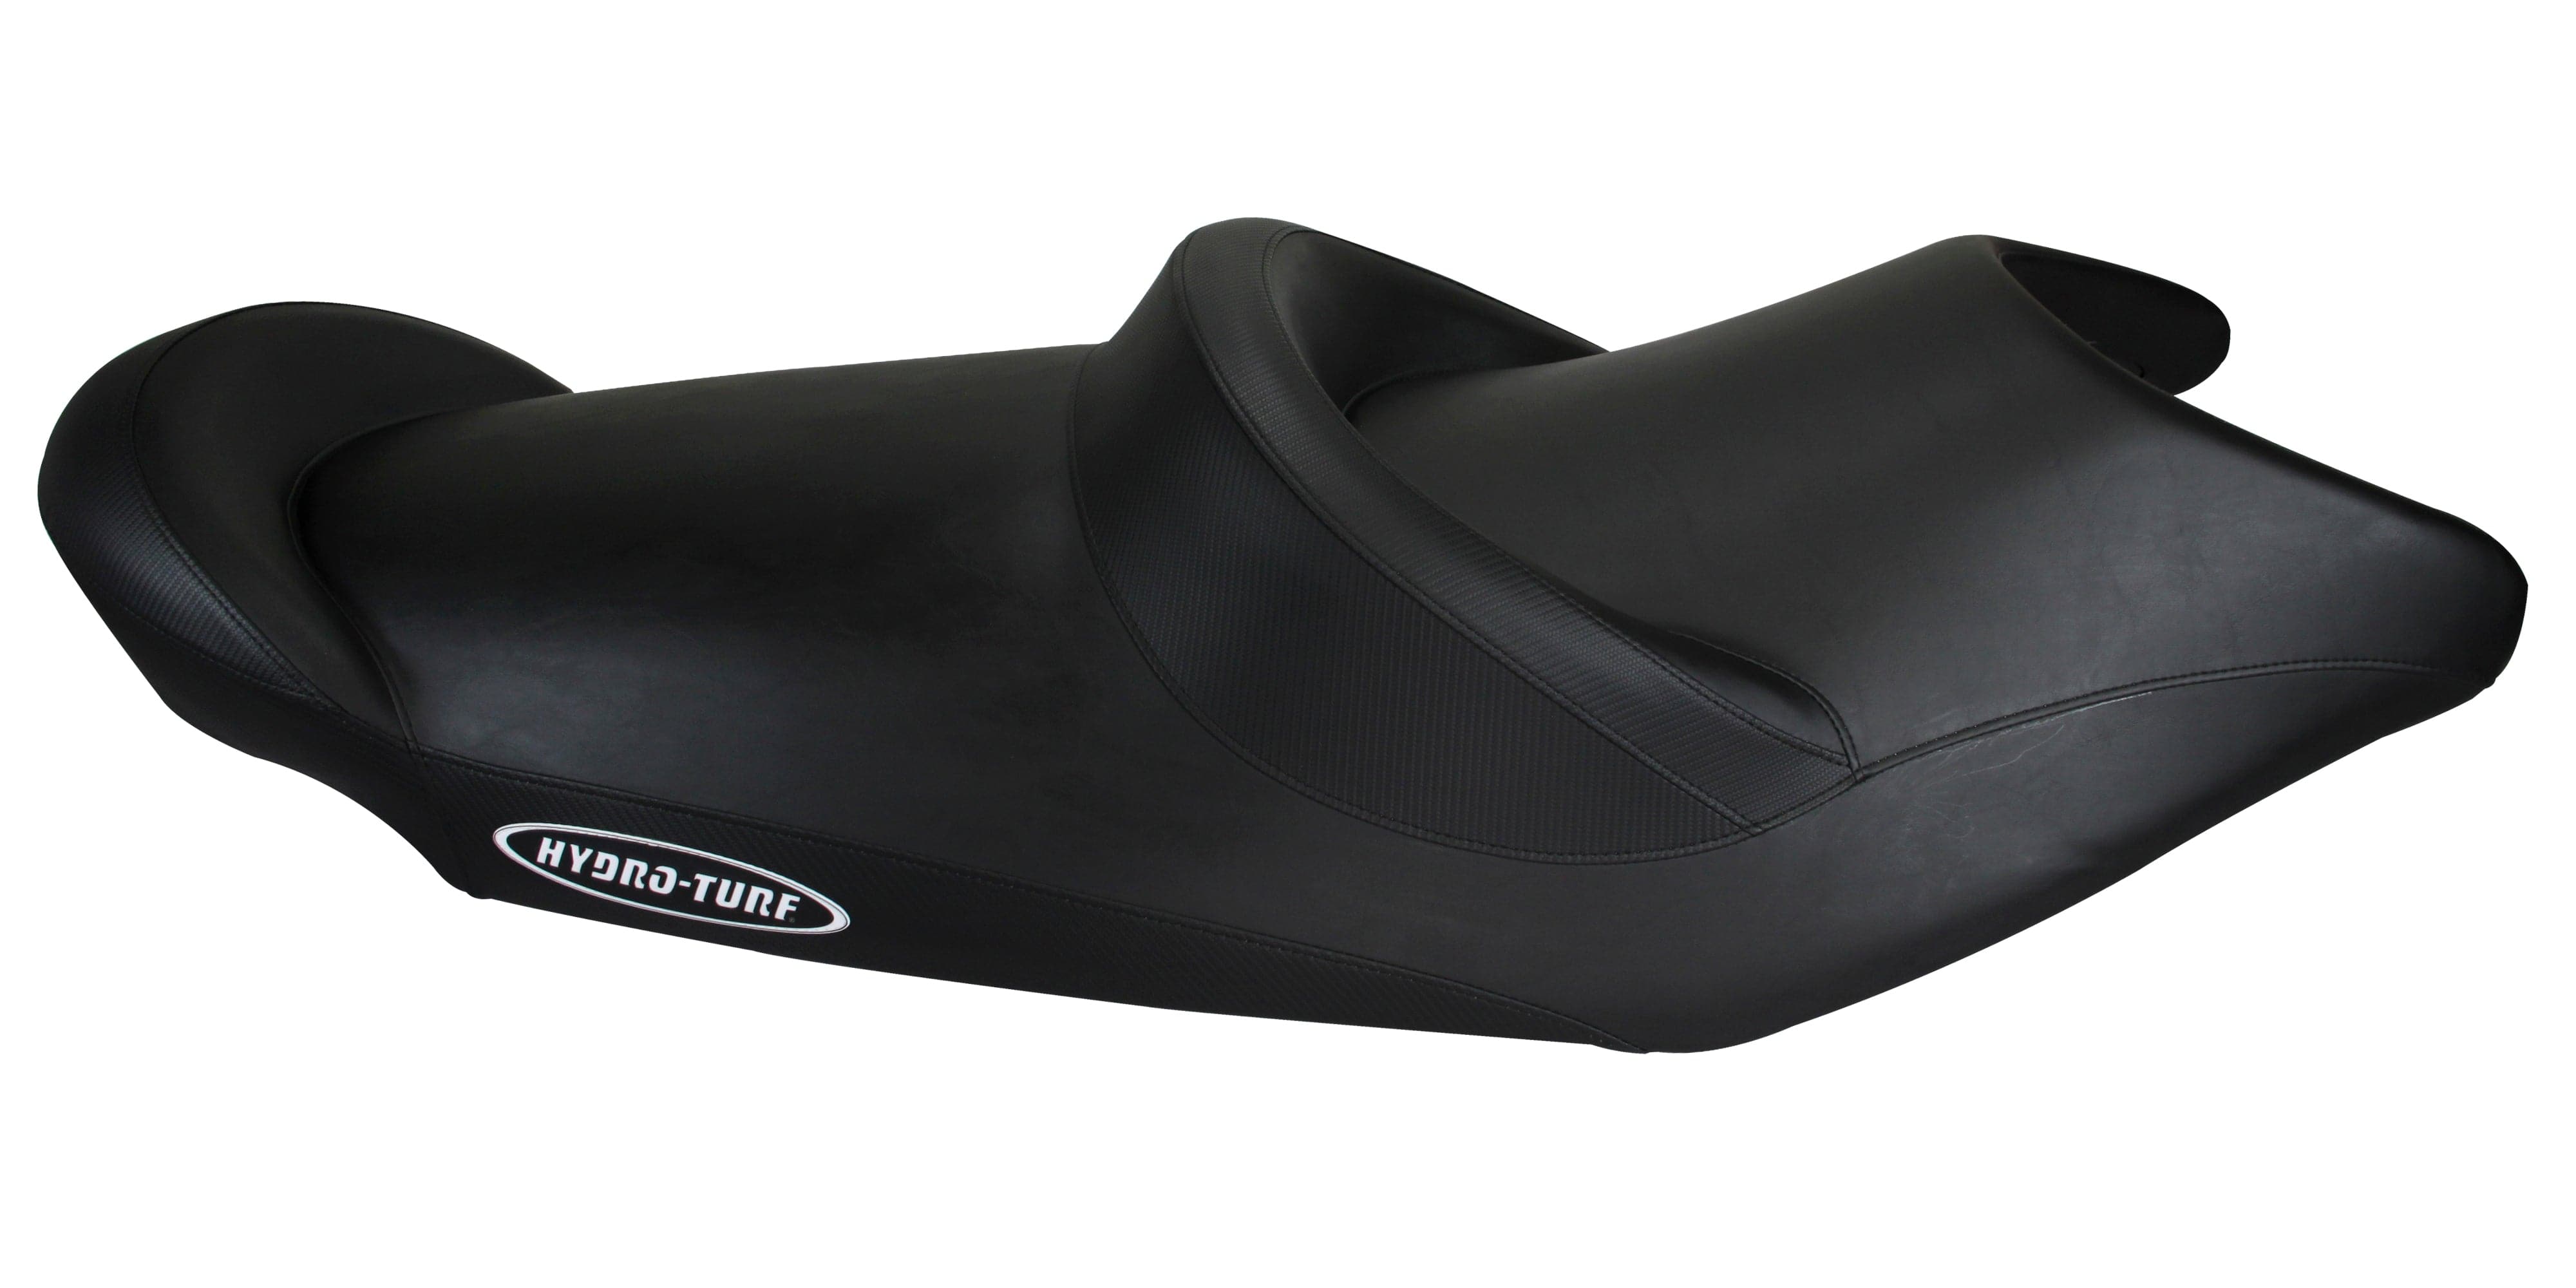 Hydro-Turf seat cover for VX Cruiser (06-09) Colorway